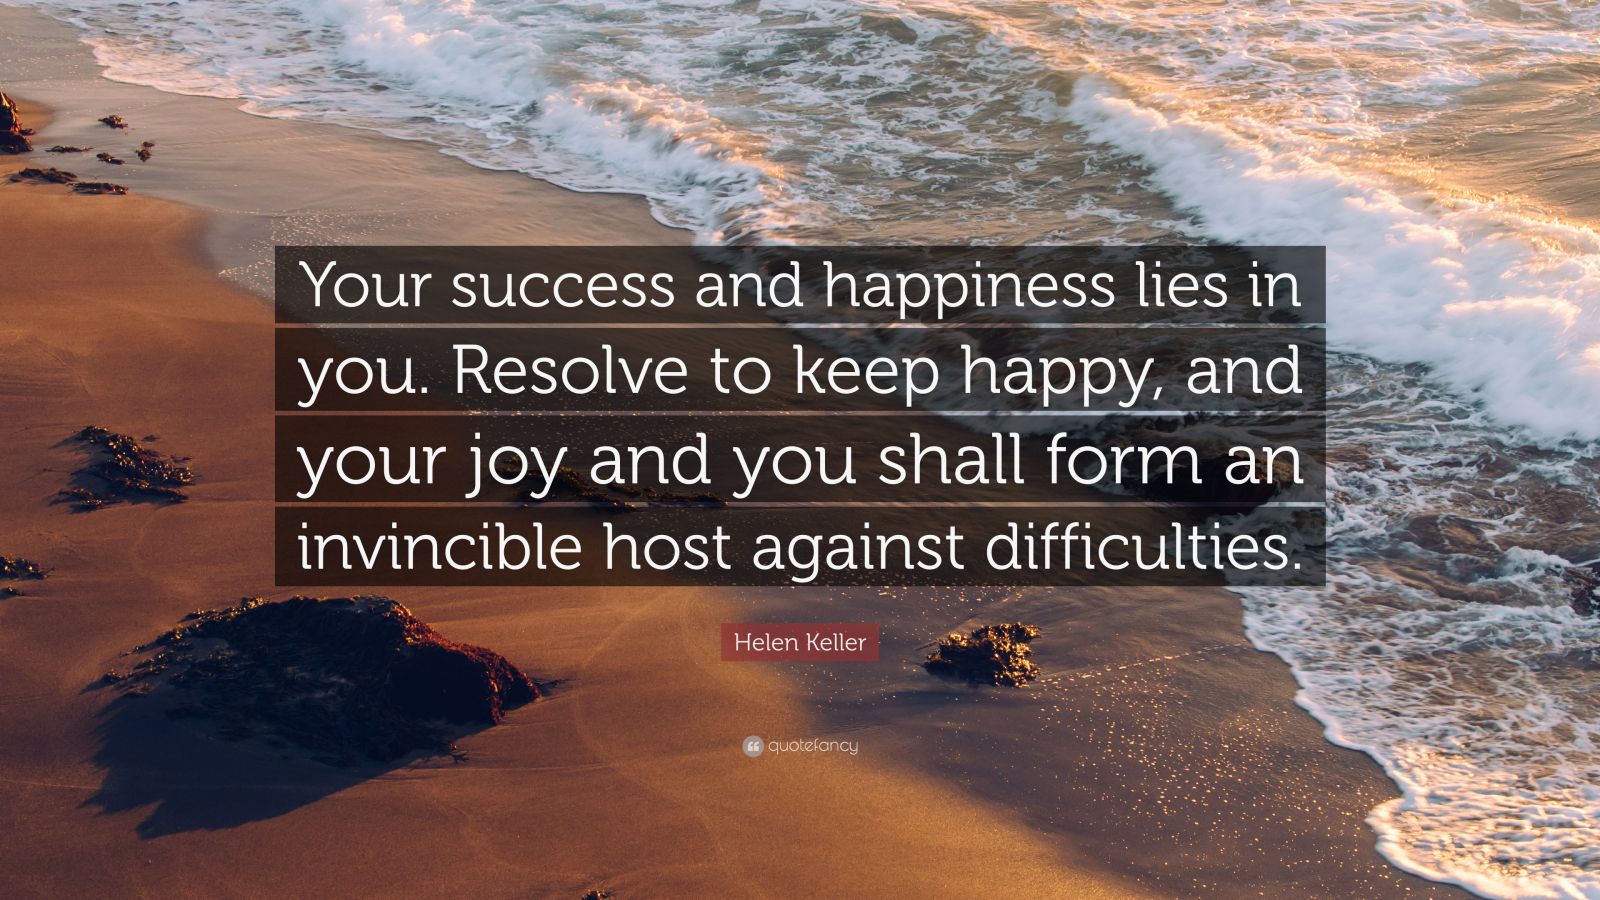 Helen Keller Quote “Your success and happiness lies in you. Resolve to